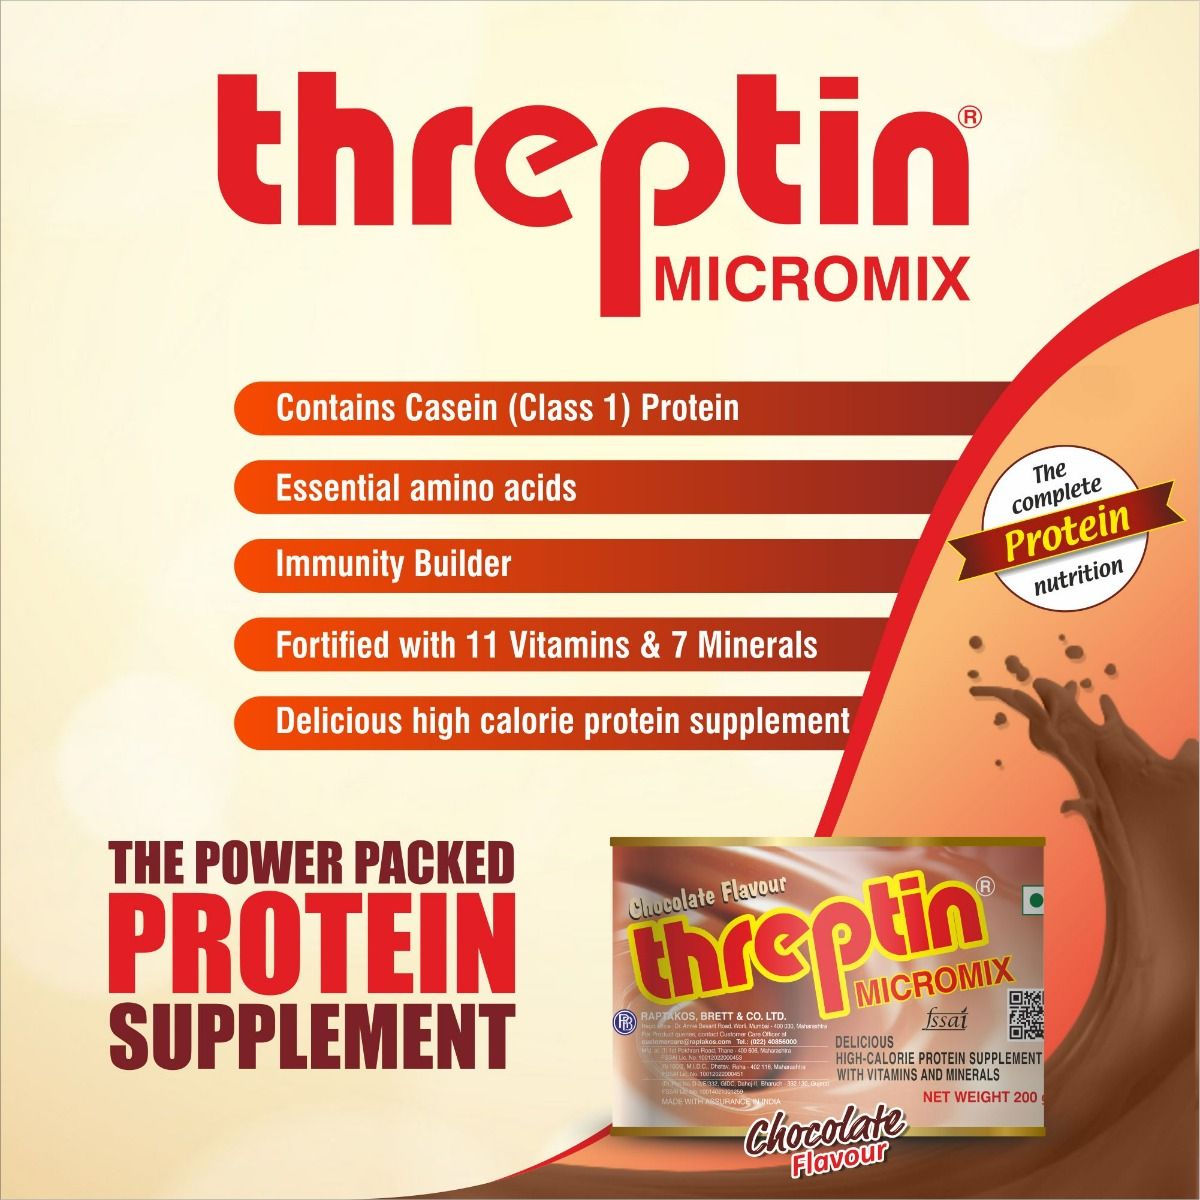 Threptin Micromix Chocolate Flavoured Powder, 200 gm, Pack of 1 